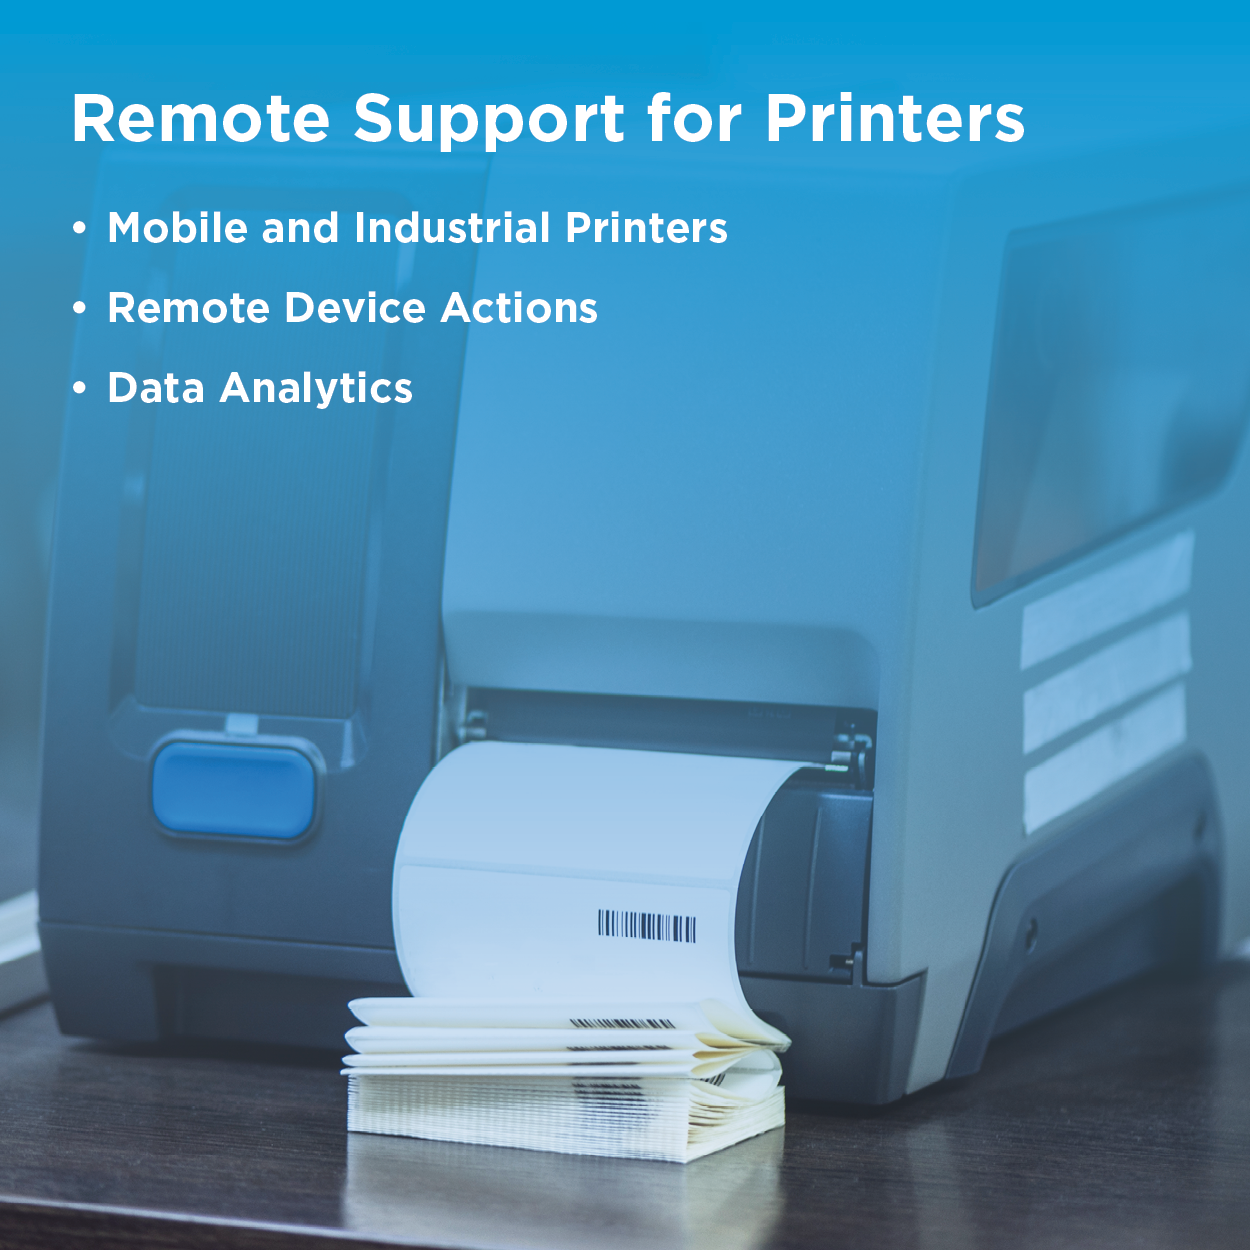 Remote Support for Printers Image